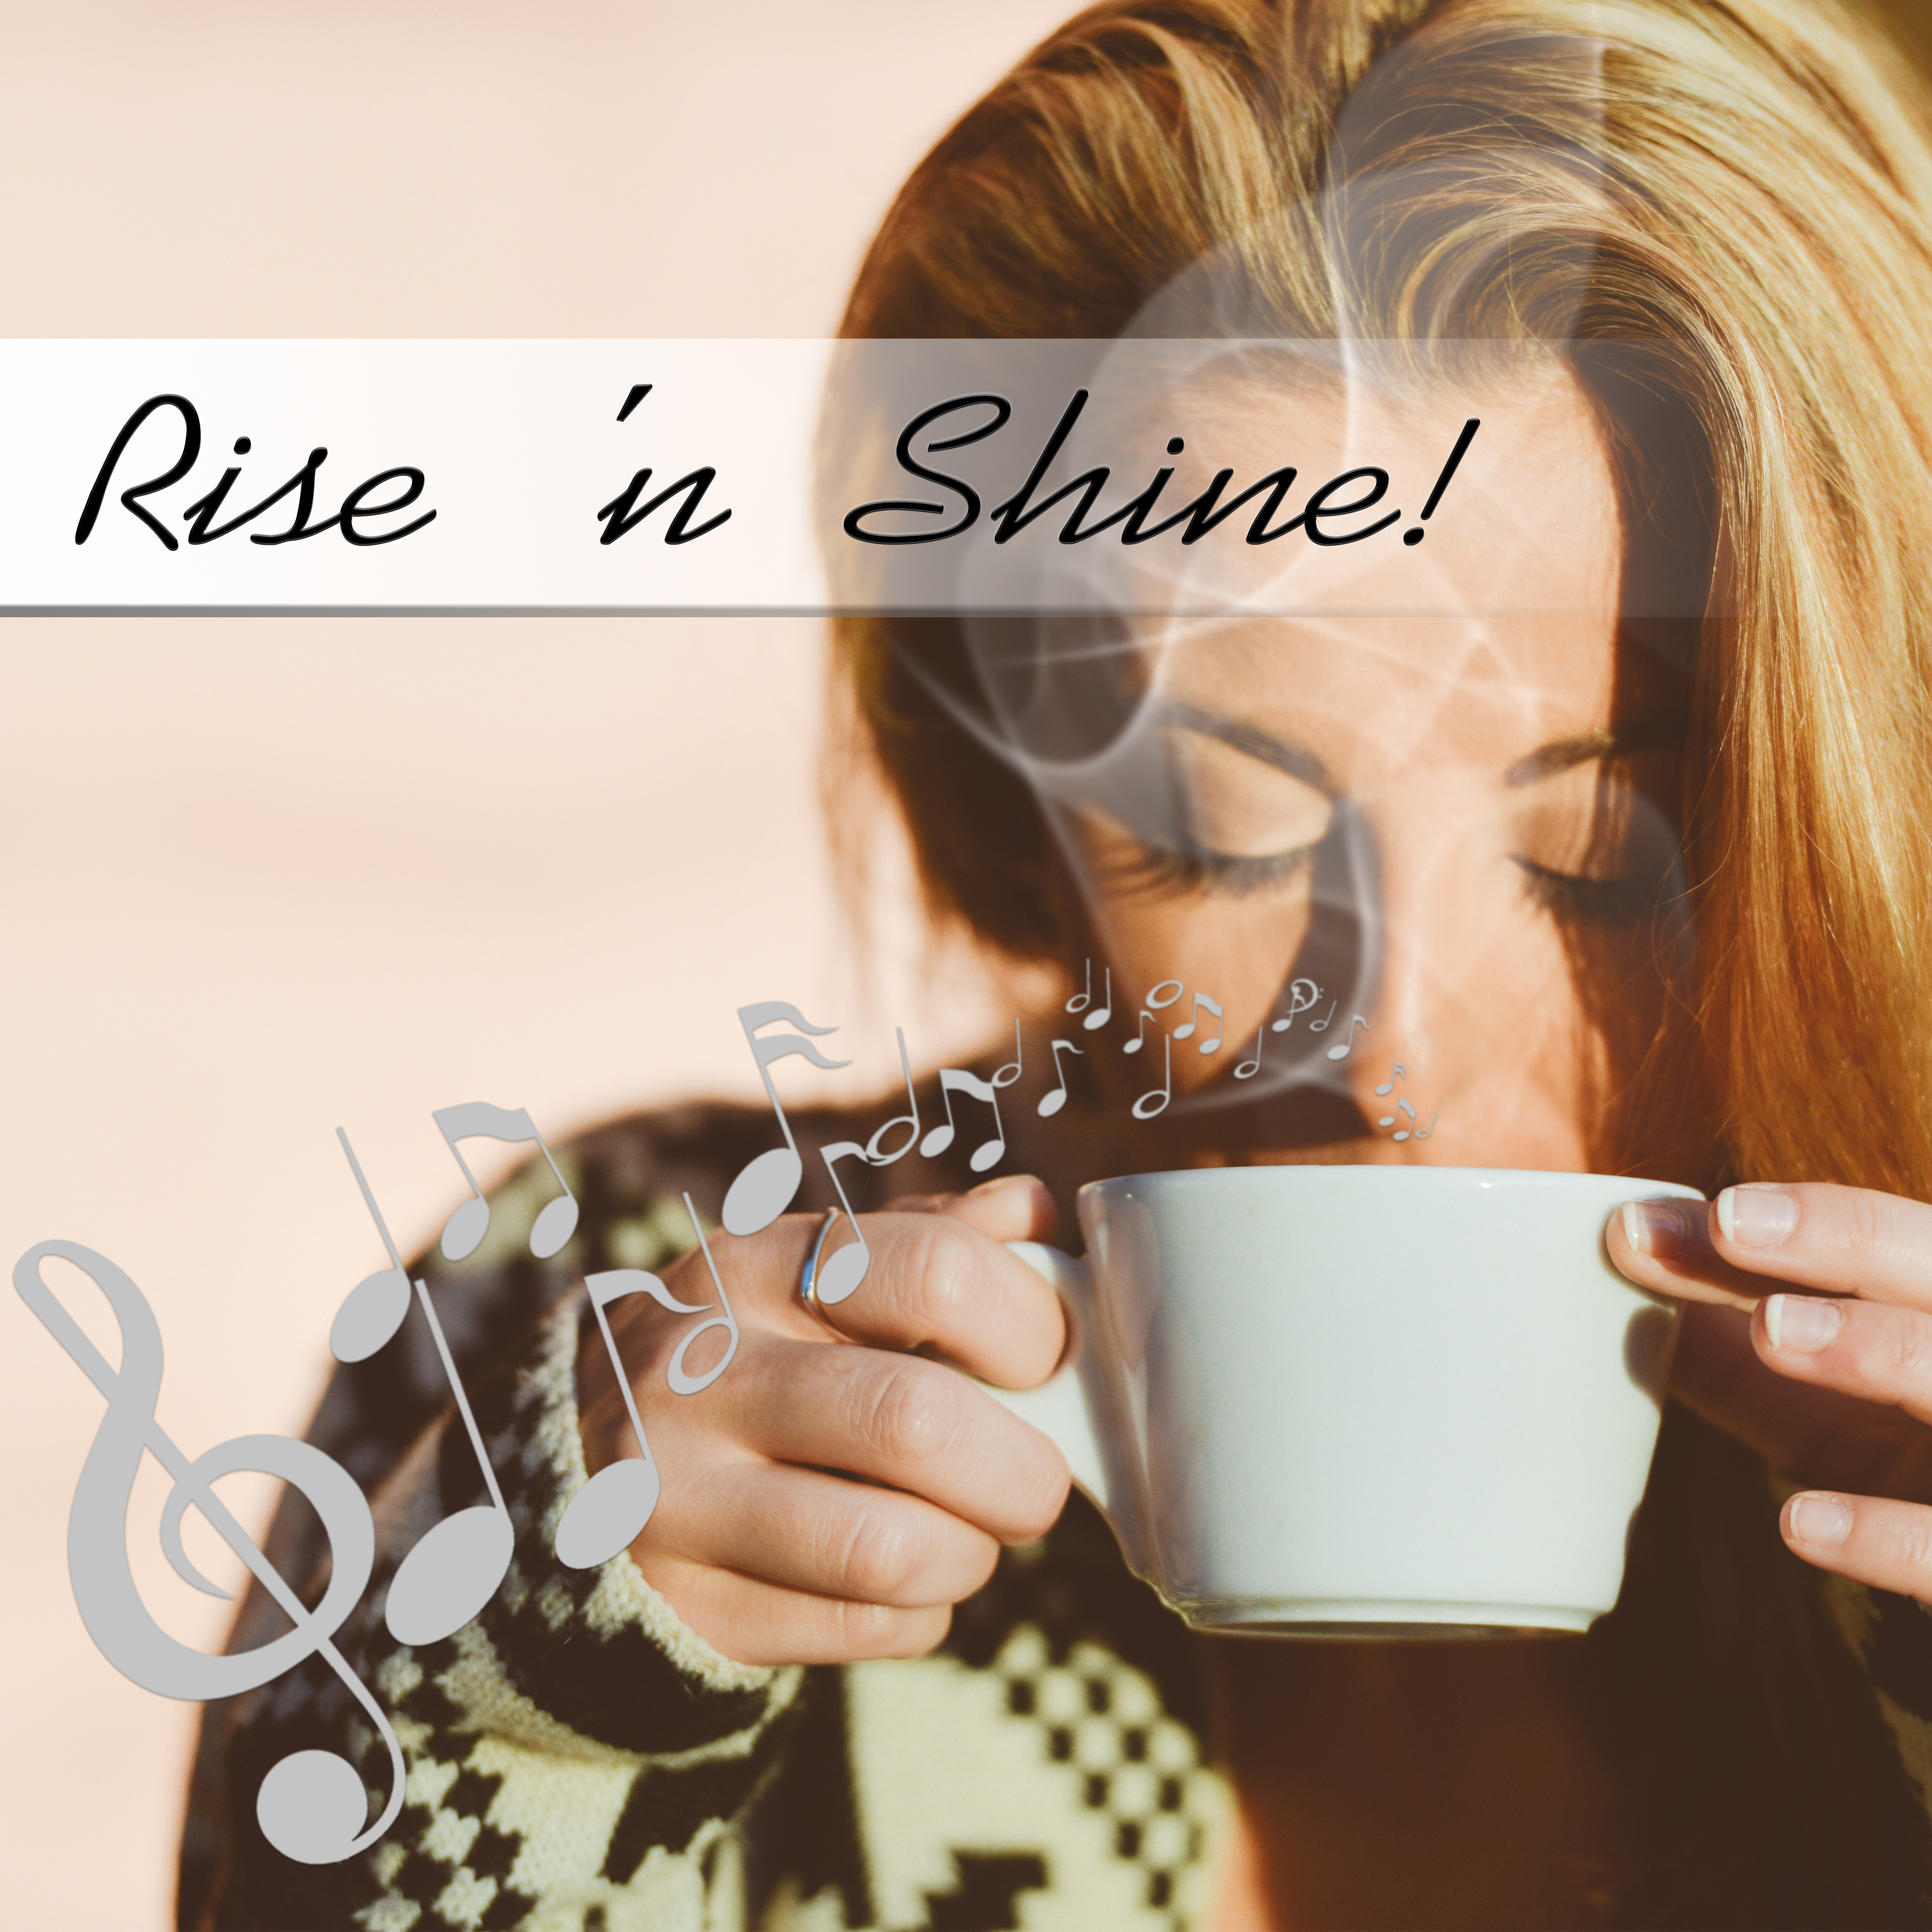 Rise 'n Shine! - Brahms & Schubert Music for Wake Up, Good Start of the Day, Get Up Early with Energy, Leave the Bed with a Good Mood, Morning Wake Up with Classical Instruments